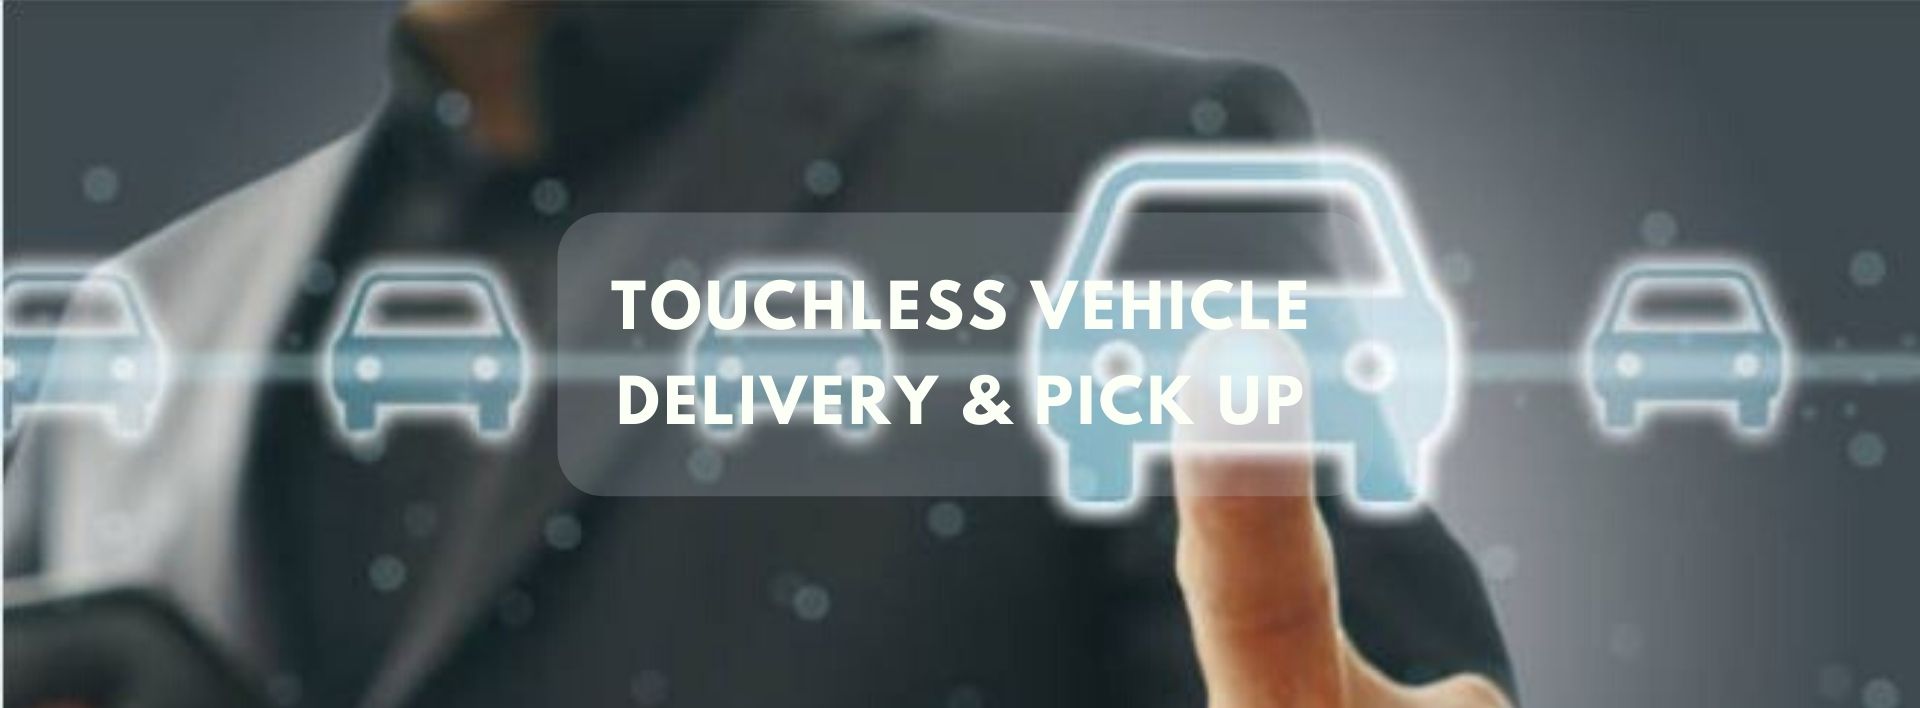 Gold Coast MG has touchless vehicle delivery and pick up